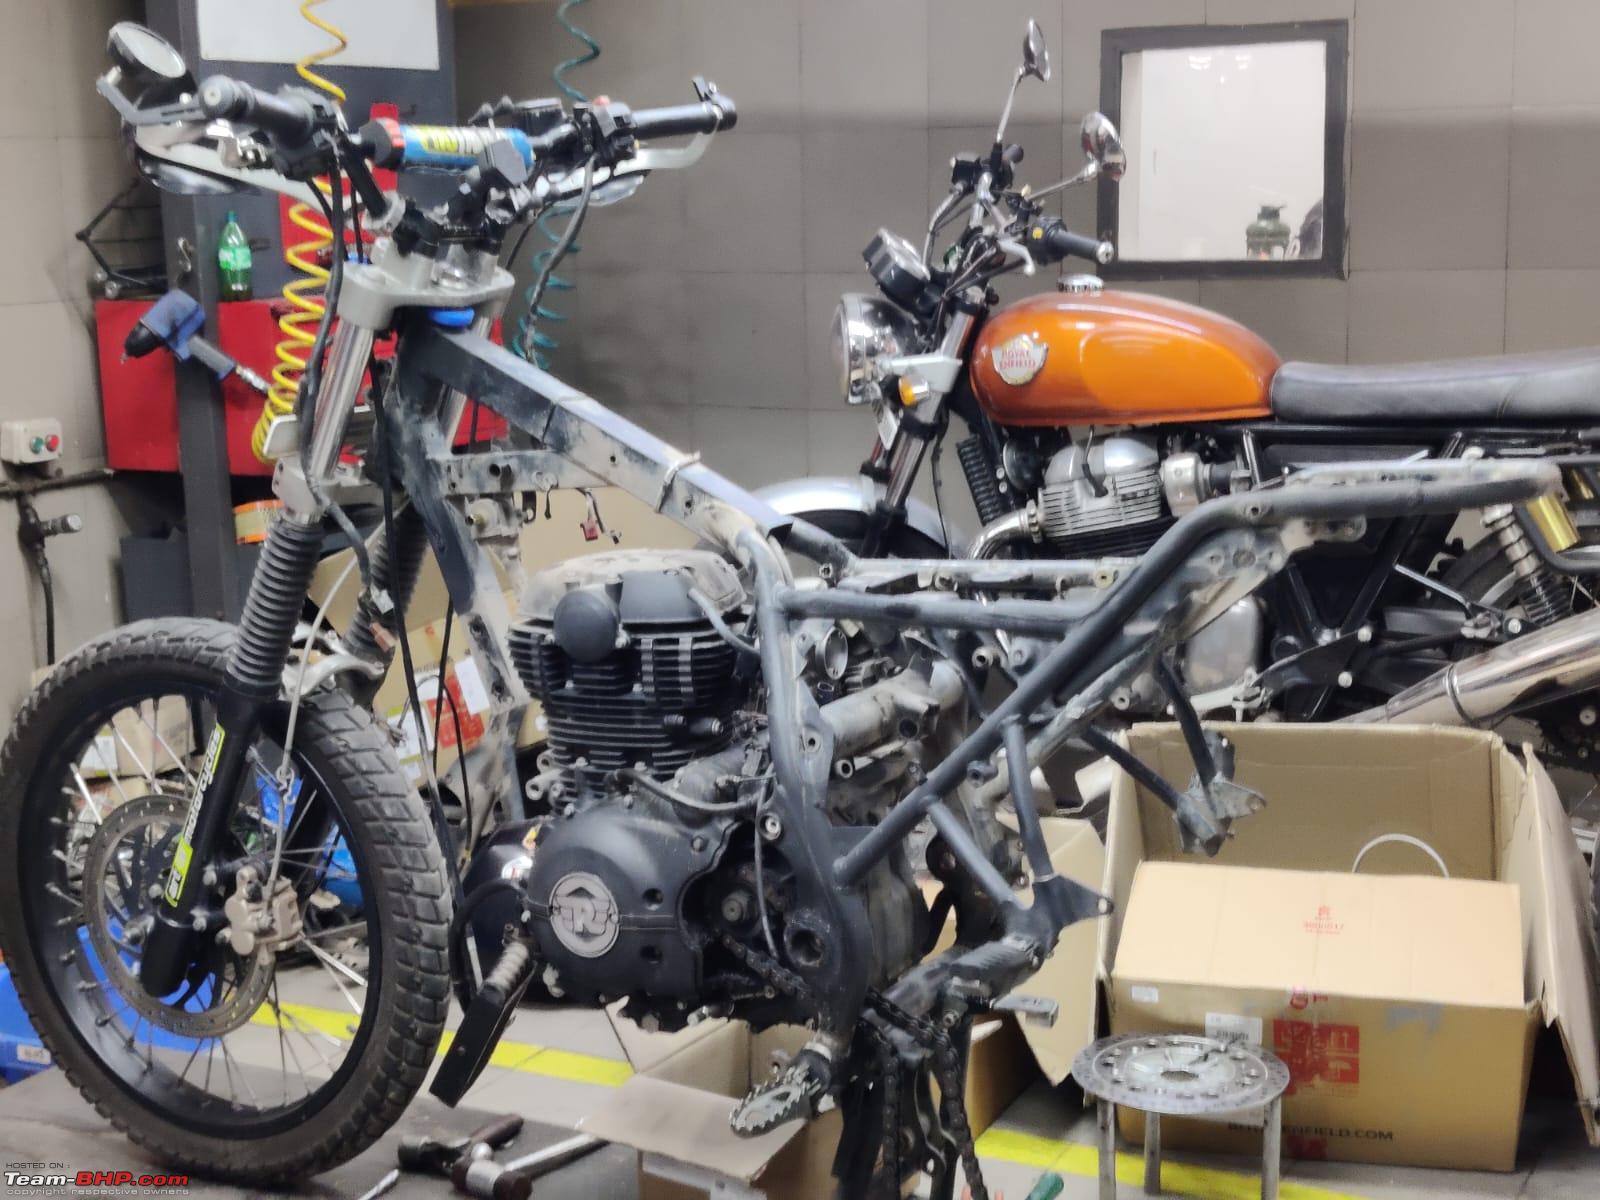 Accessories for the Royal Enfield - Team-BHP